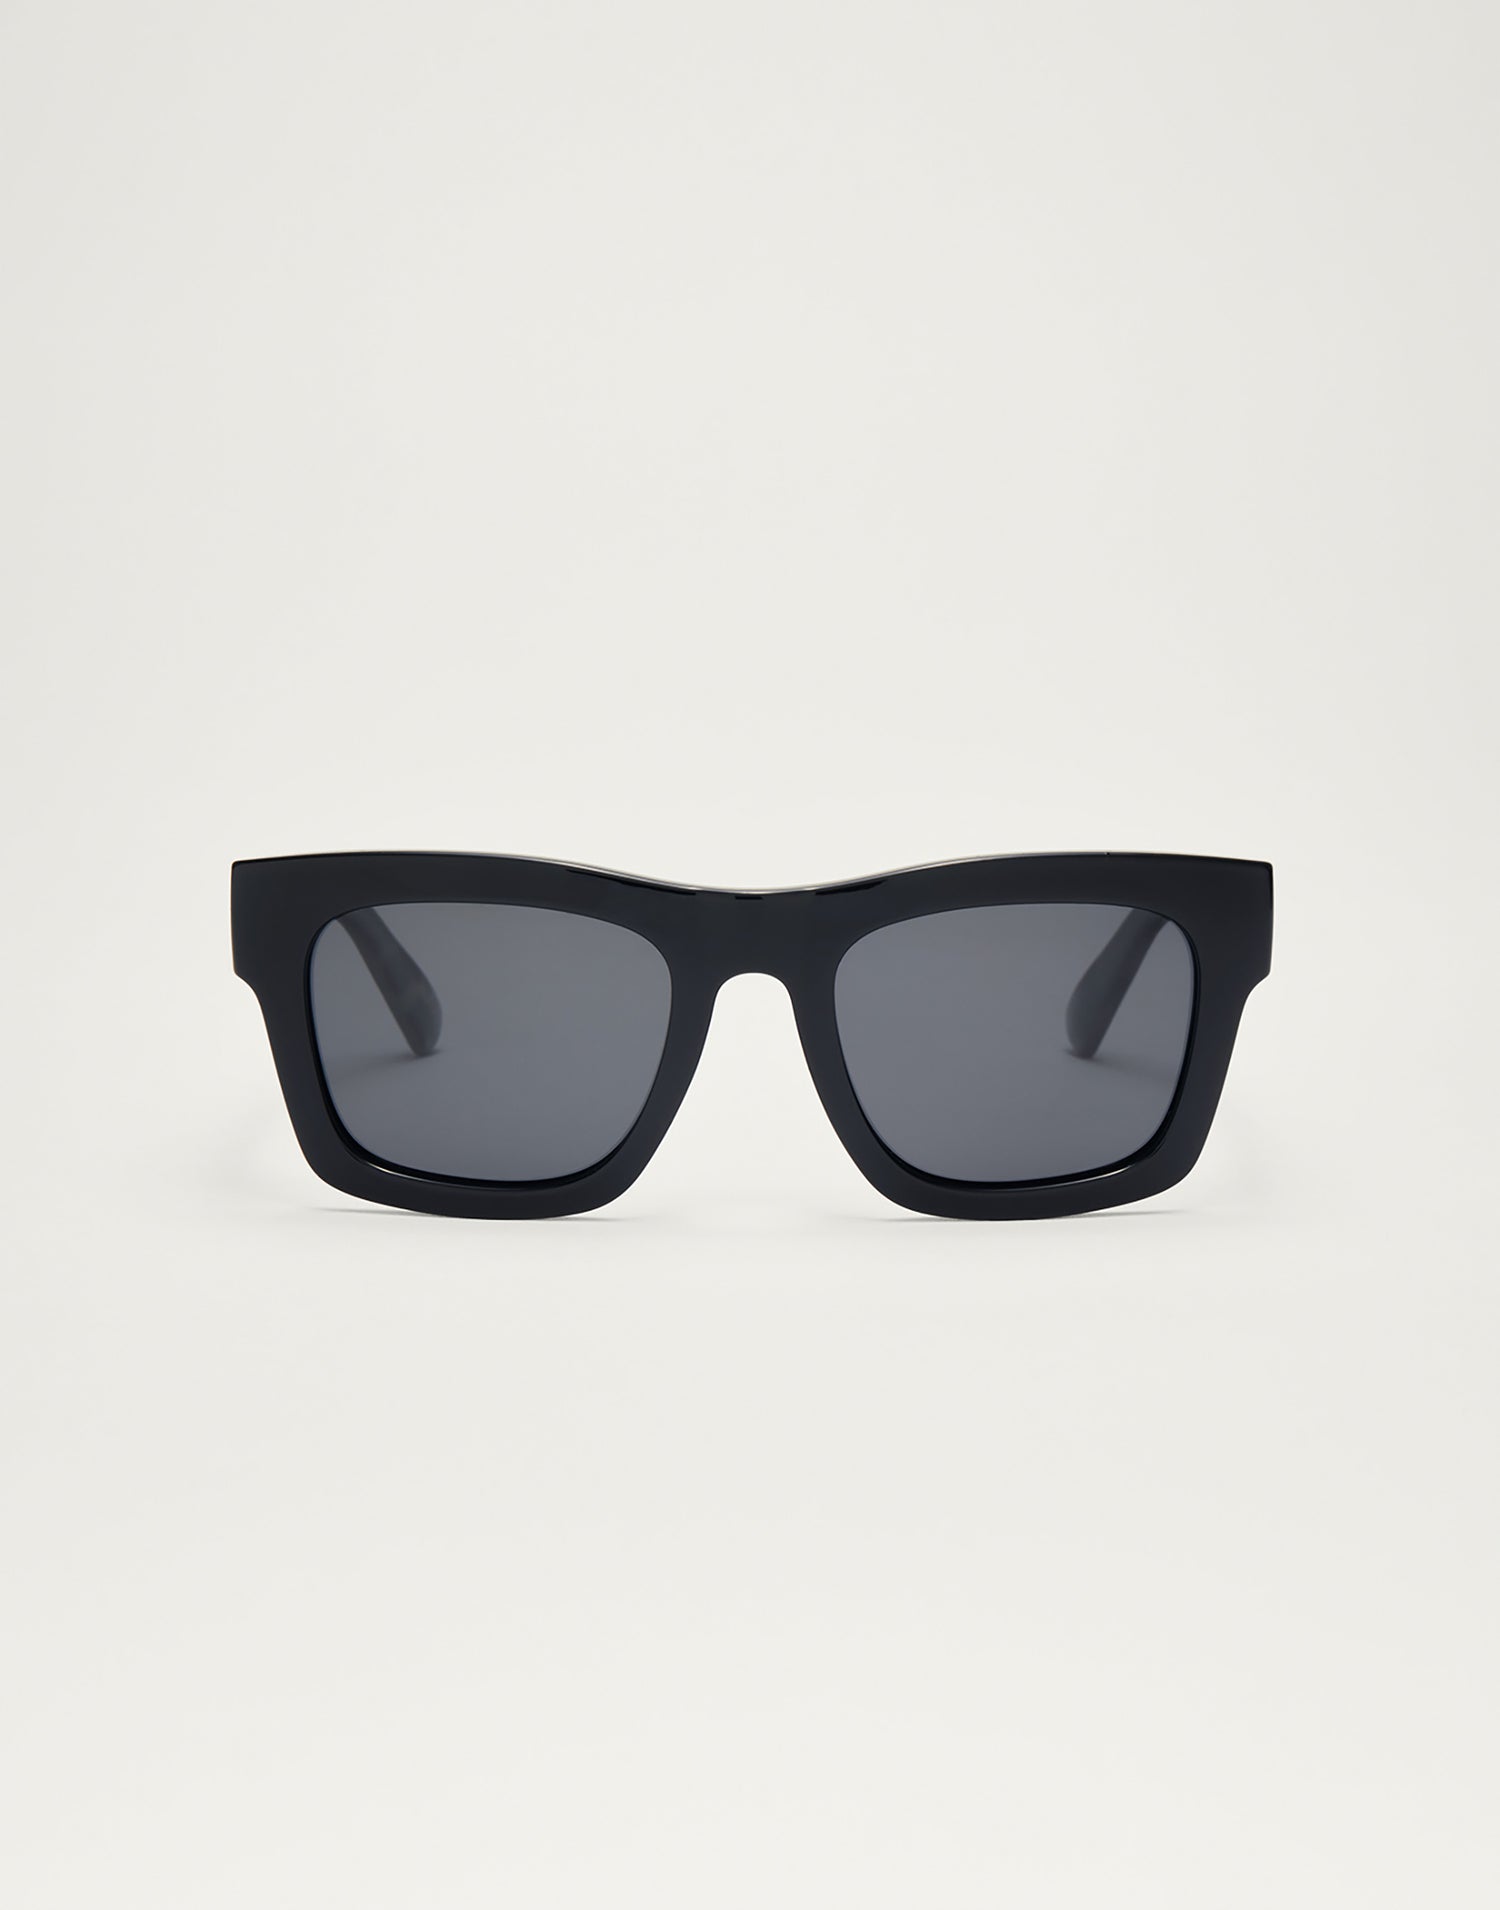 Laylow Sunglasses by Z Supply in Polished Black - Front View